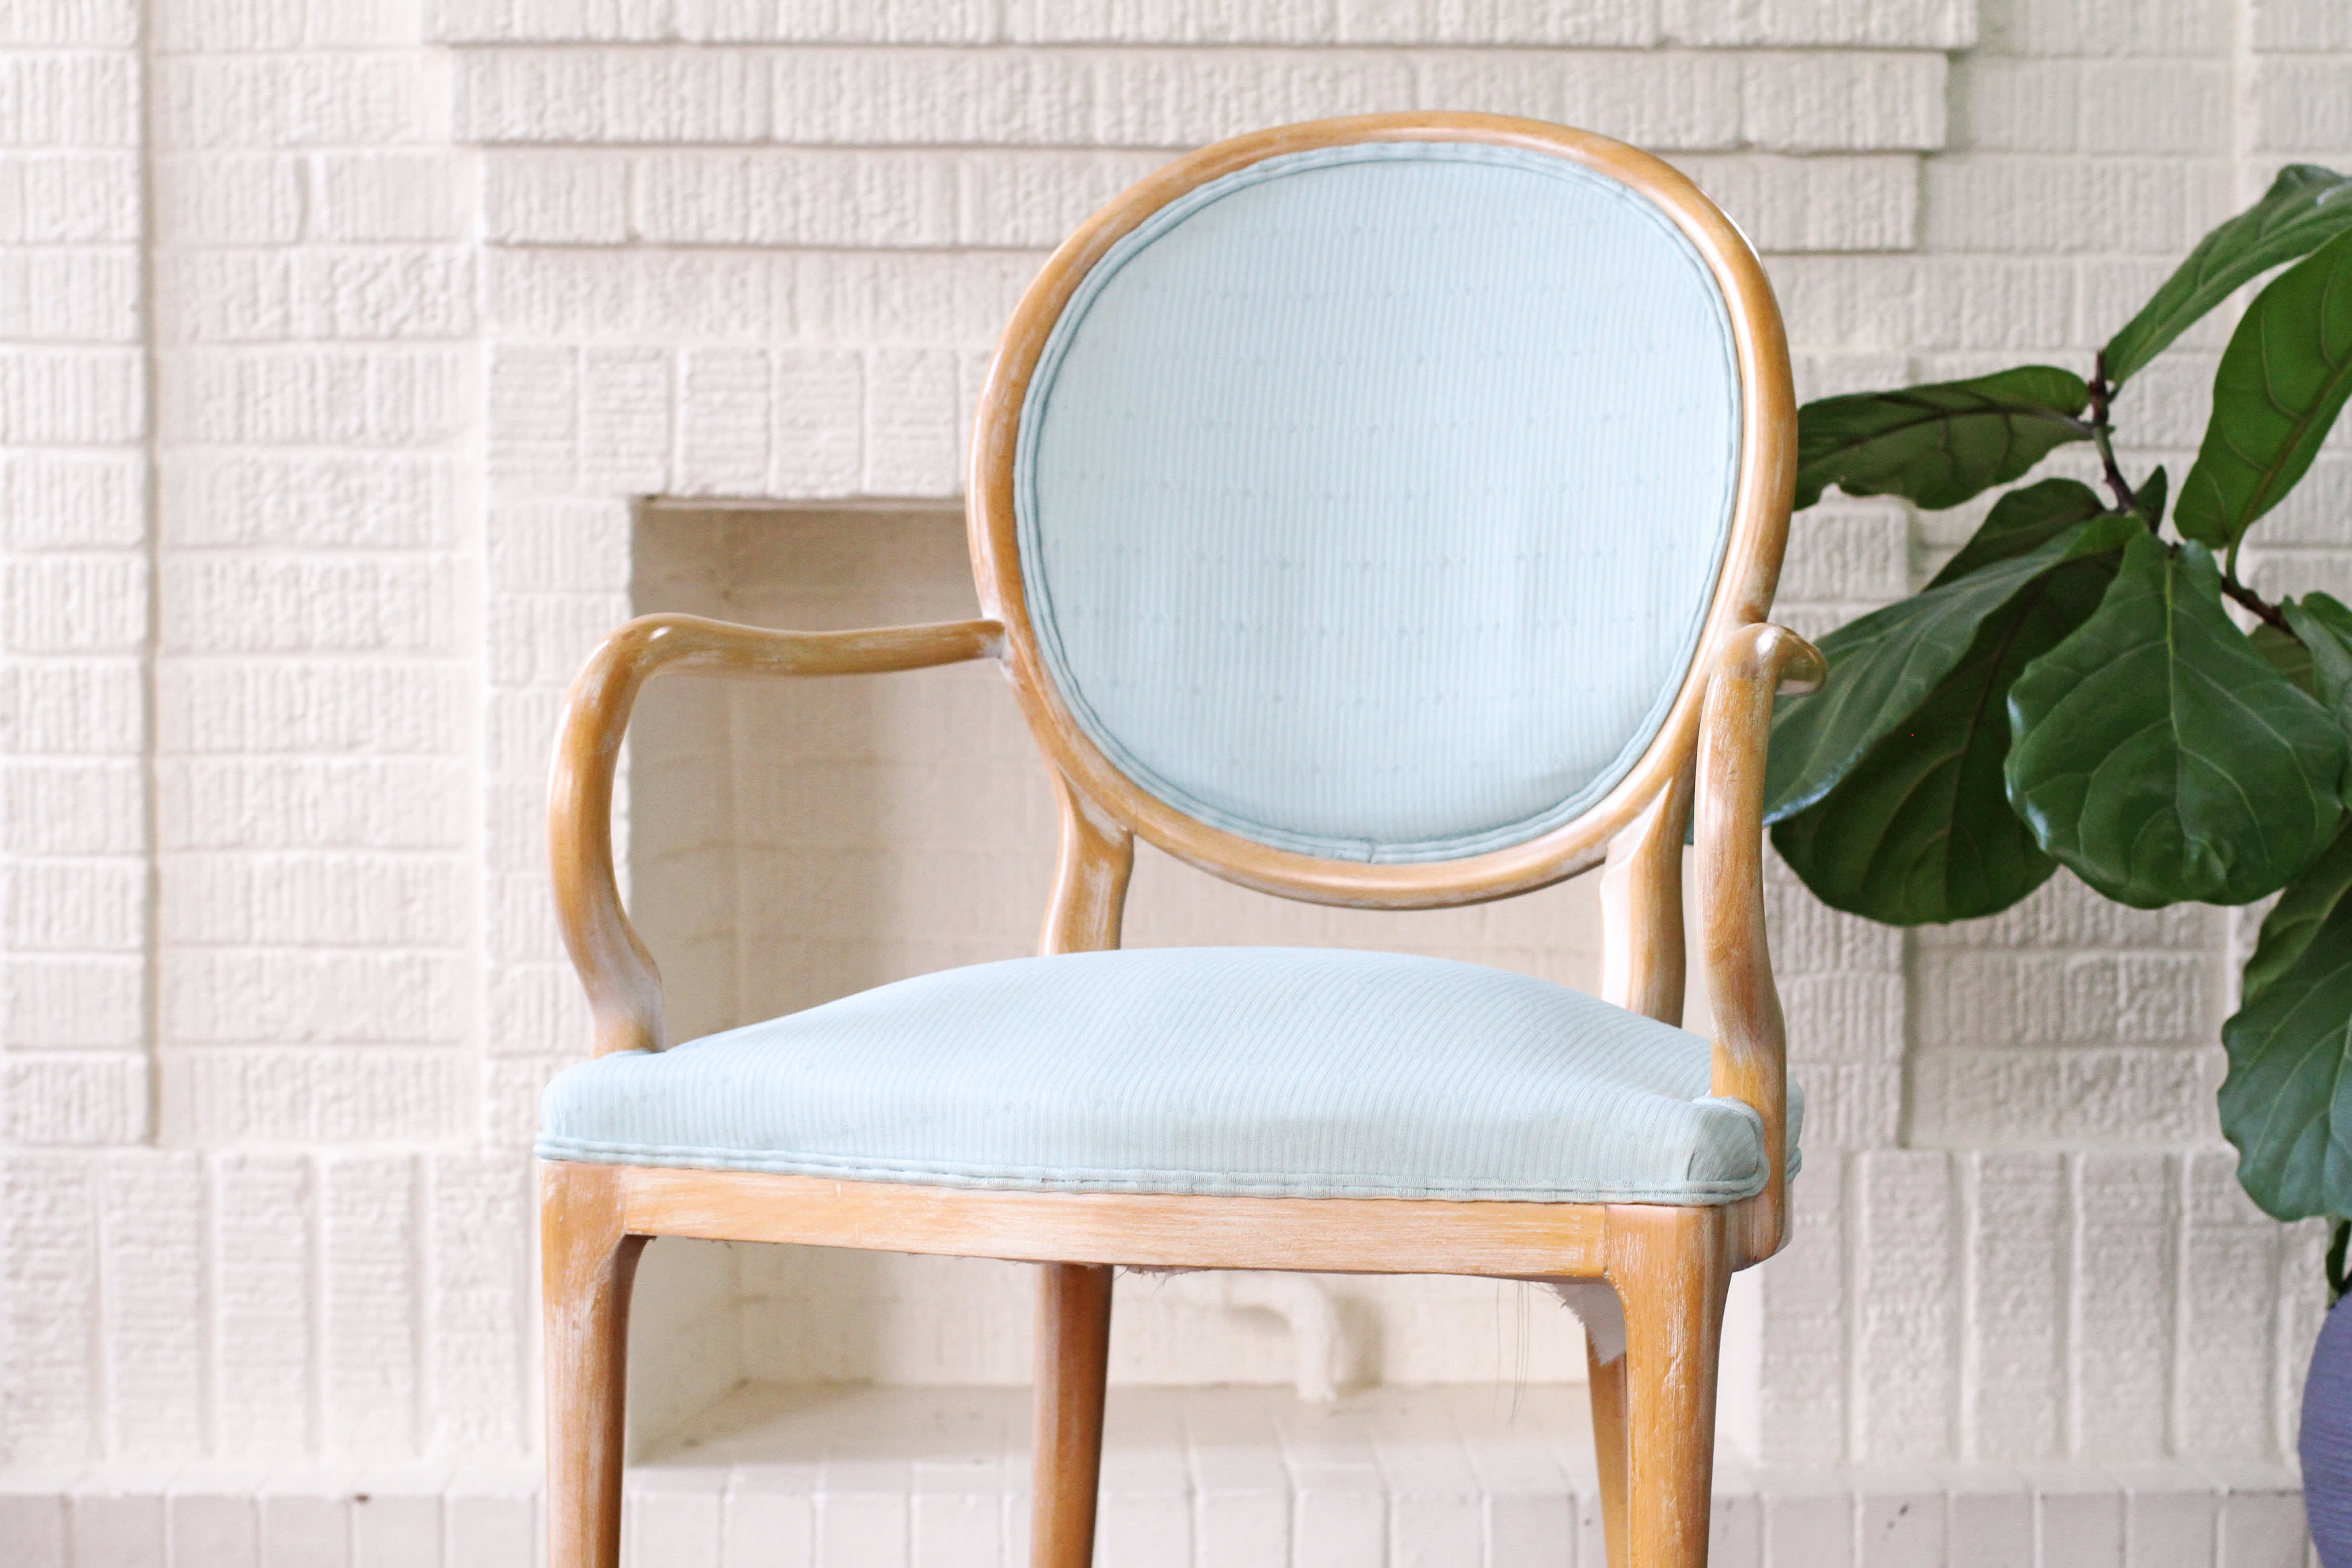 Painting Fabric With Chalk Paint: What to Know